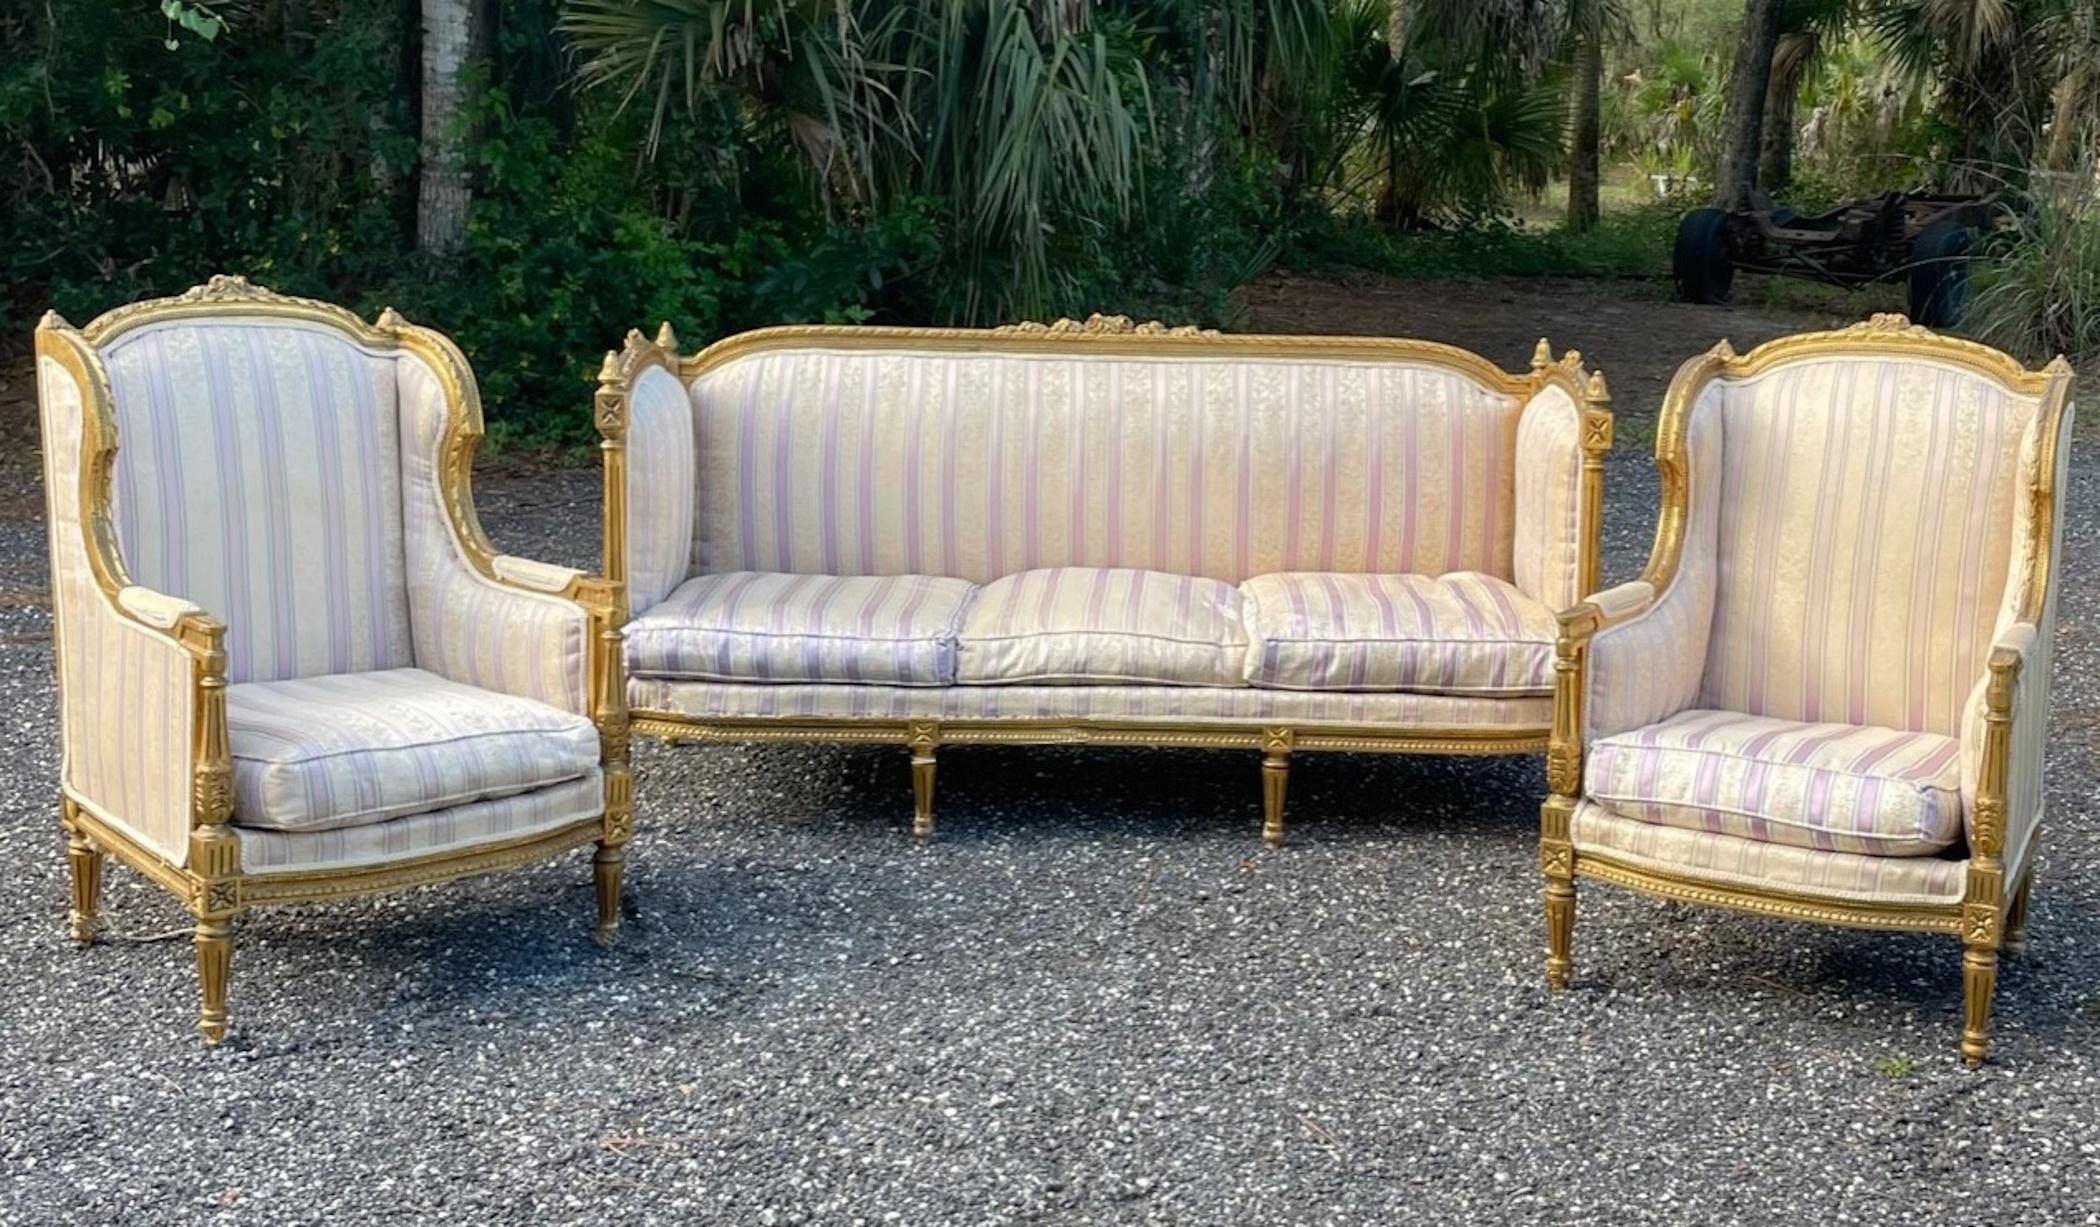 French 19th Century Louis XVI Style Settee and Bergeres A Oreilles

Exquisite gilt wood carved French Louis XVI style Parlor Suite, comprised of a
Settee and two Bergers a Oreilles. They are created in France during the turn of the century. The